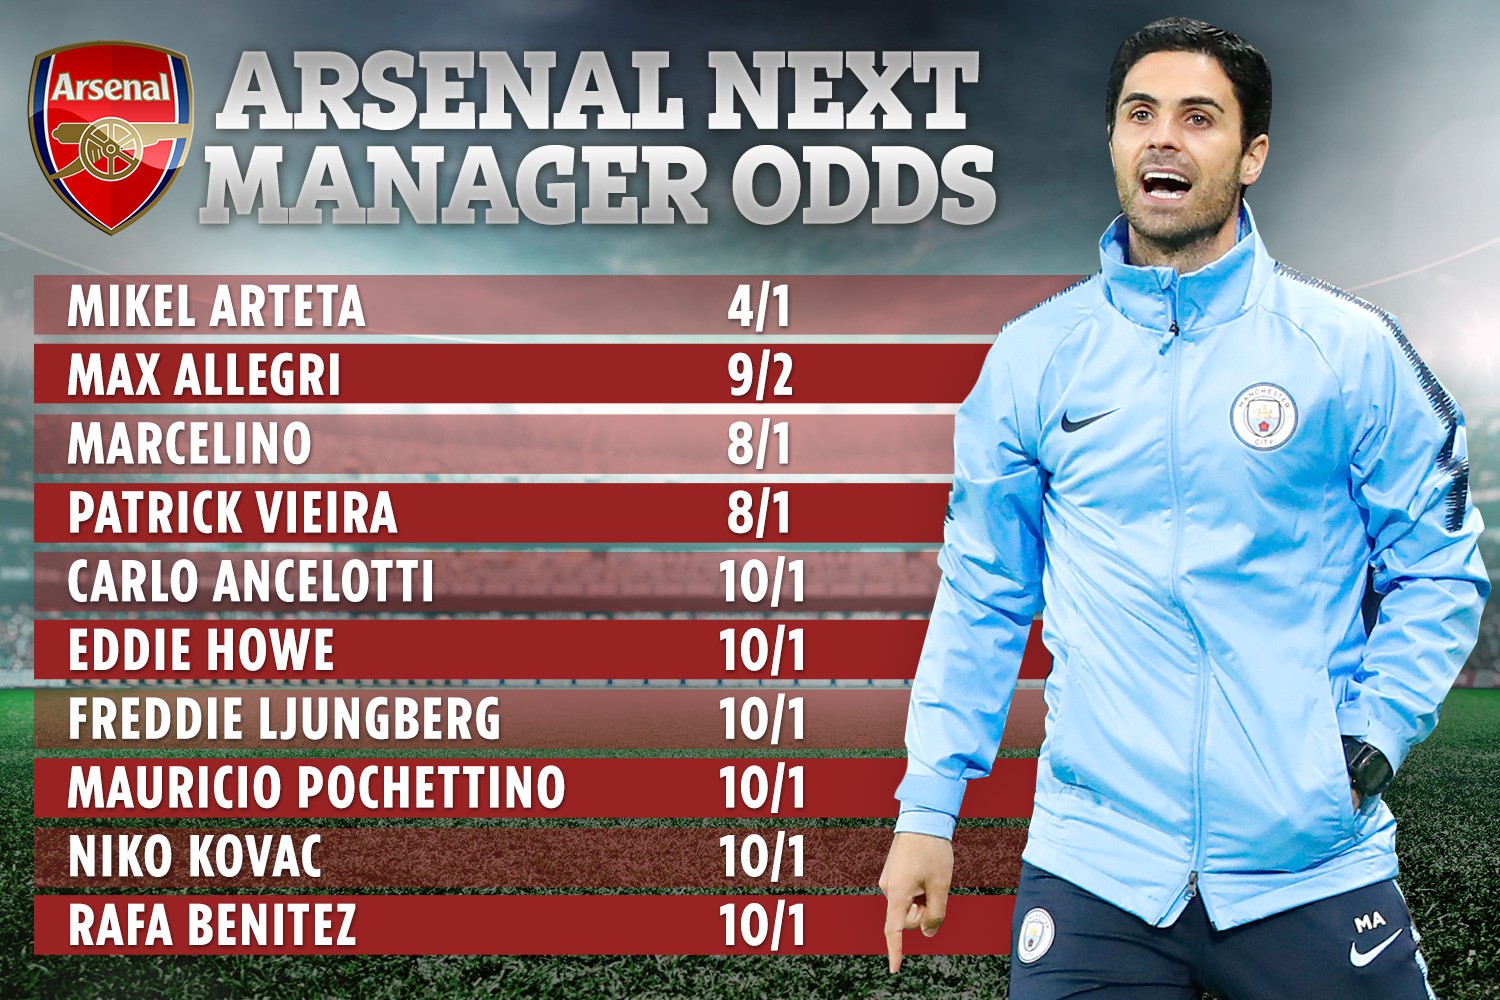 , Mikel Arteta desperate for Arsenal managers job but wants guarantees off board and does not want to upset Man City